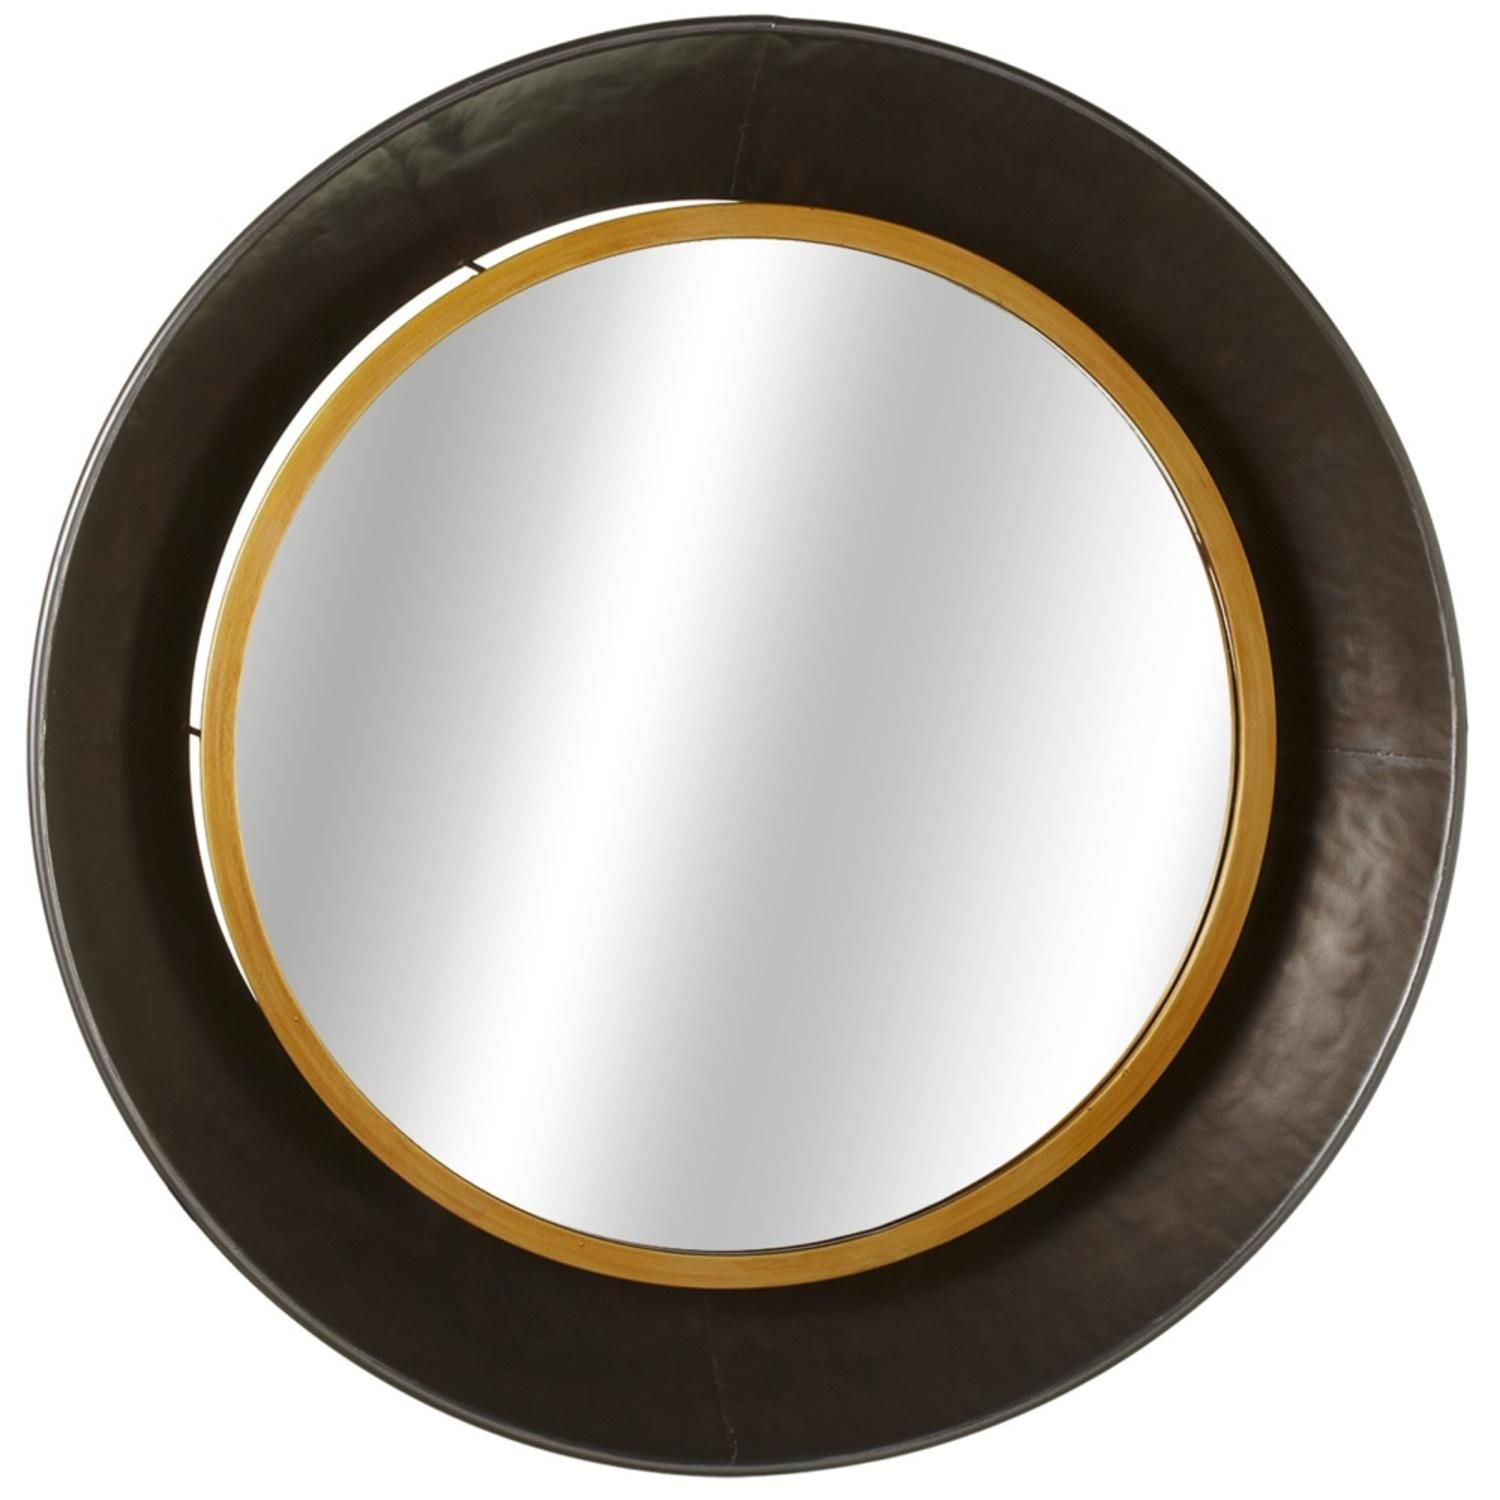 Set Of 2 Brown Decorative Gunmetal Bowl Round Wall Mirror With Gold In Brown Leather Round Wall Mirrors (View 7 of 15)